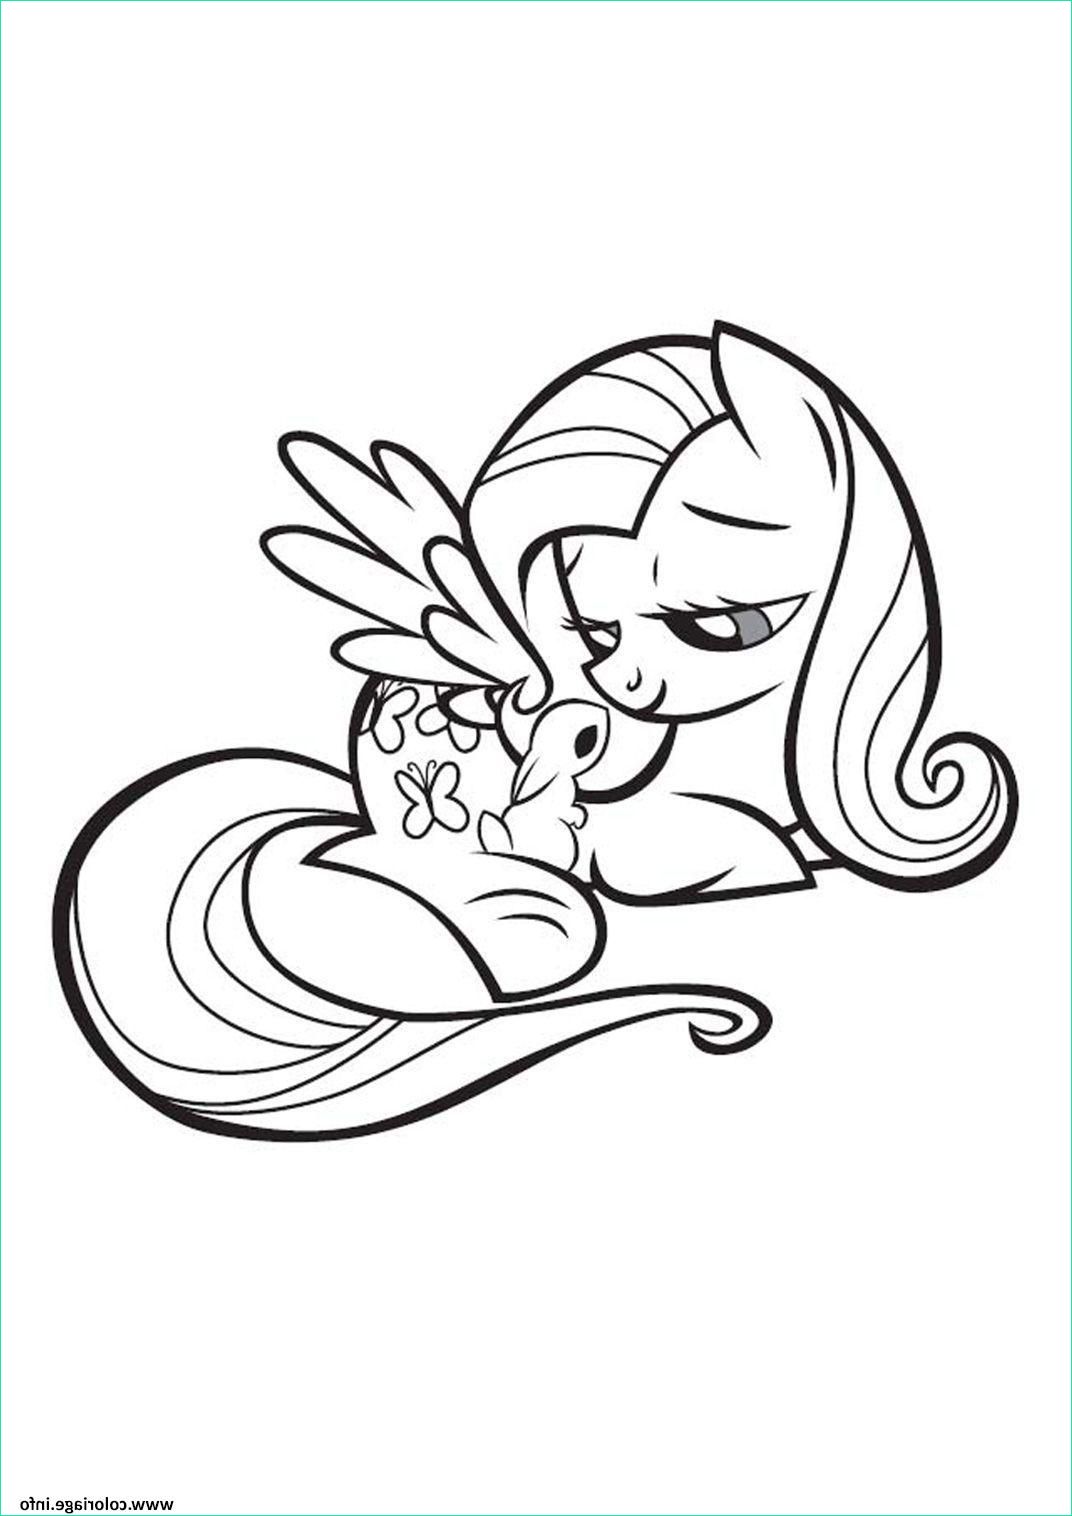 Coloriage My Little Poney Impressionnant Photos Coloriage My Little Poney